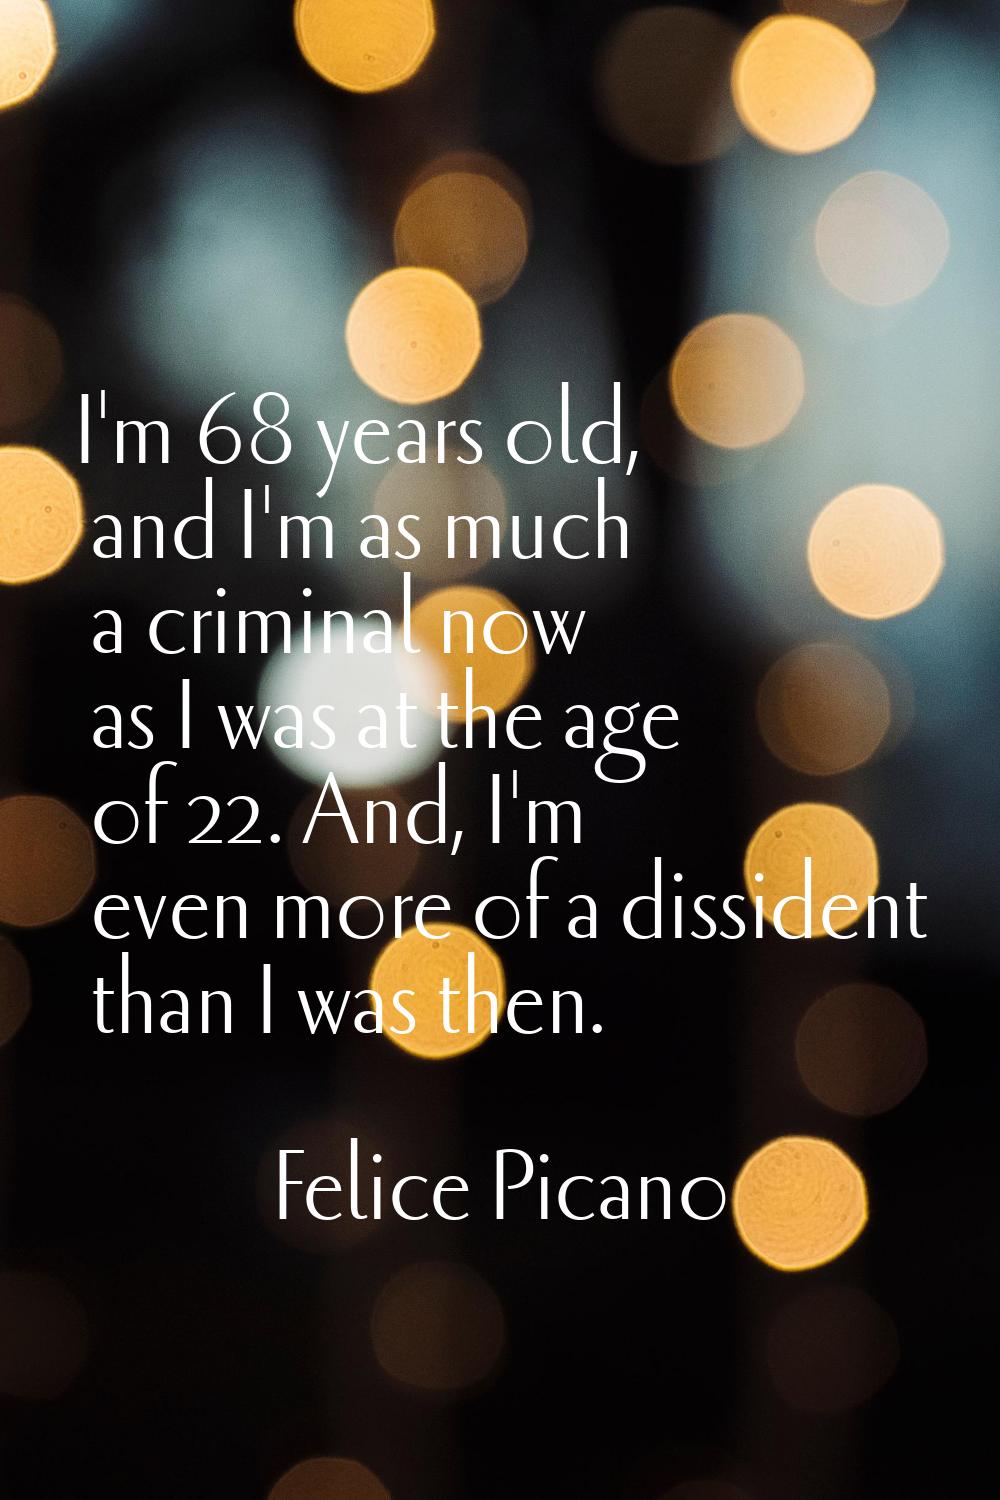 I'm 68 years old, and I'm as much a criminal now as I was at the age of 22. And, I'm even more of a